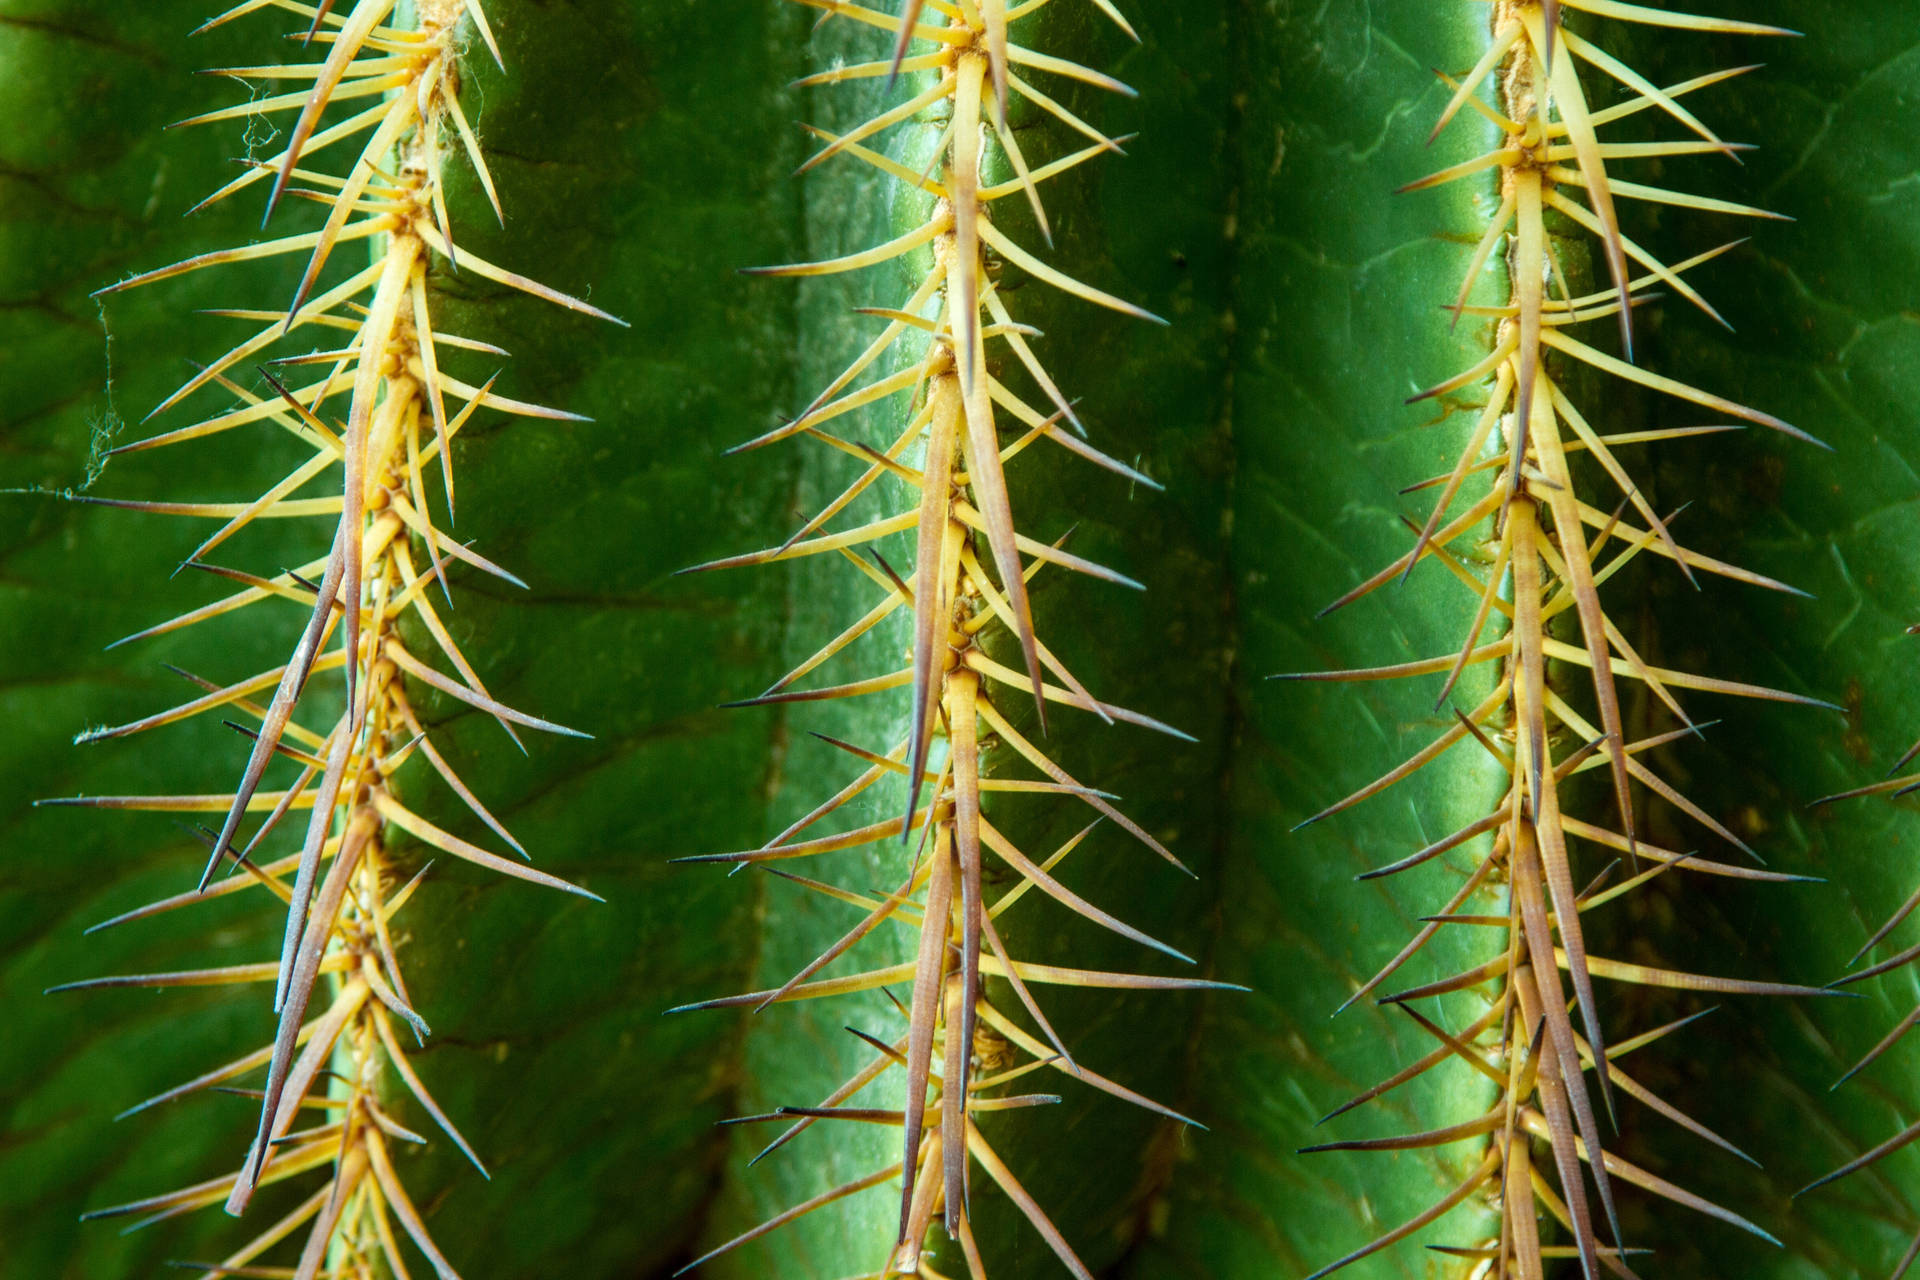 Cactus 4739X3159 Wallpaper and Background Image